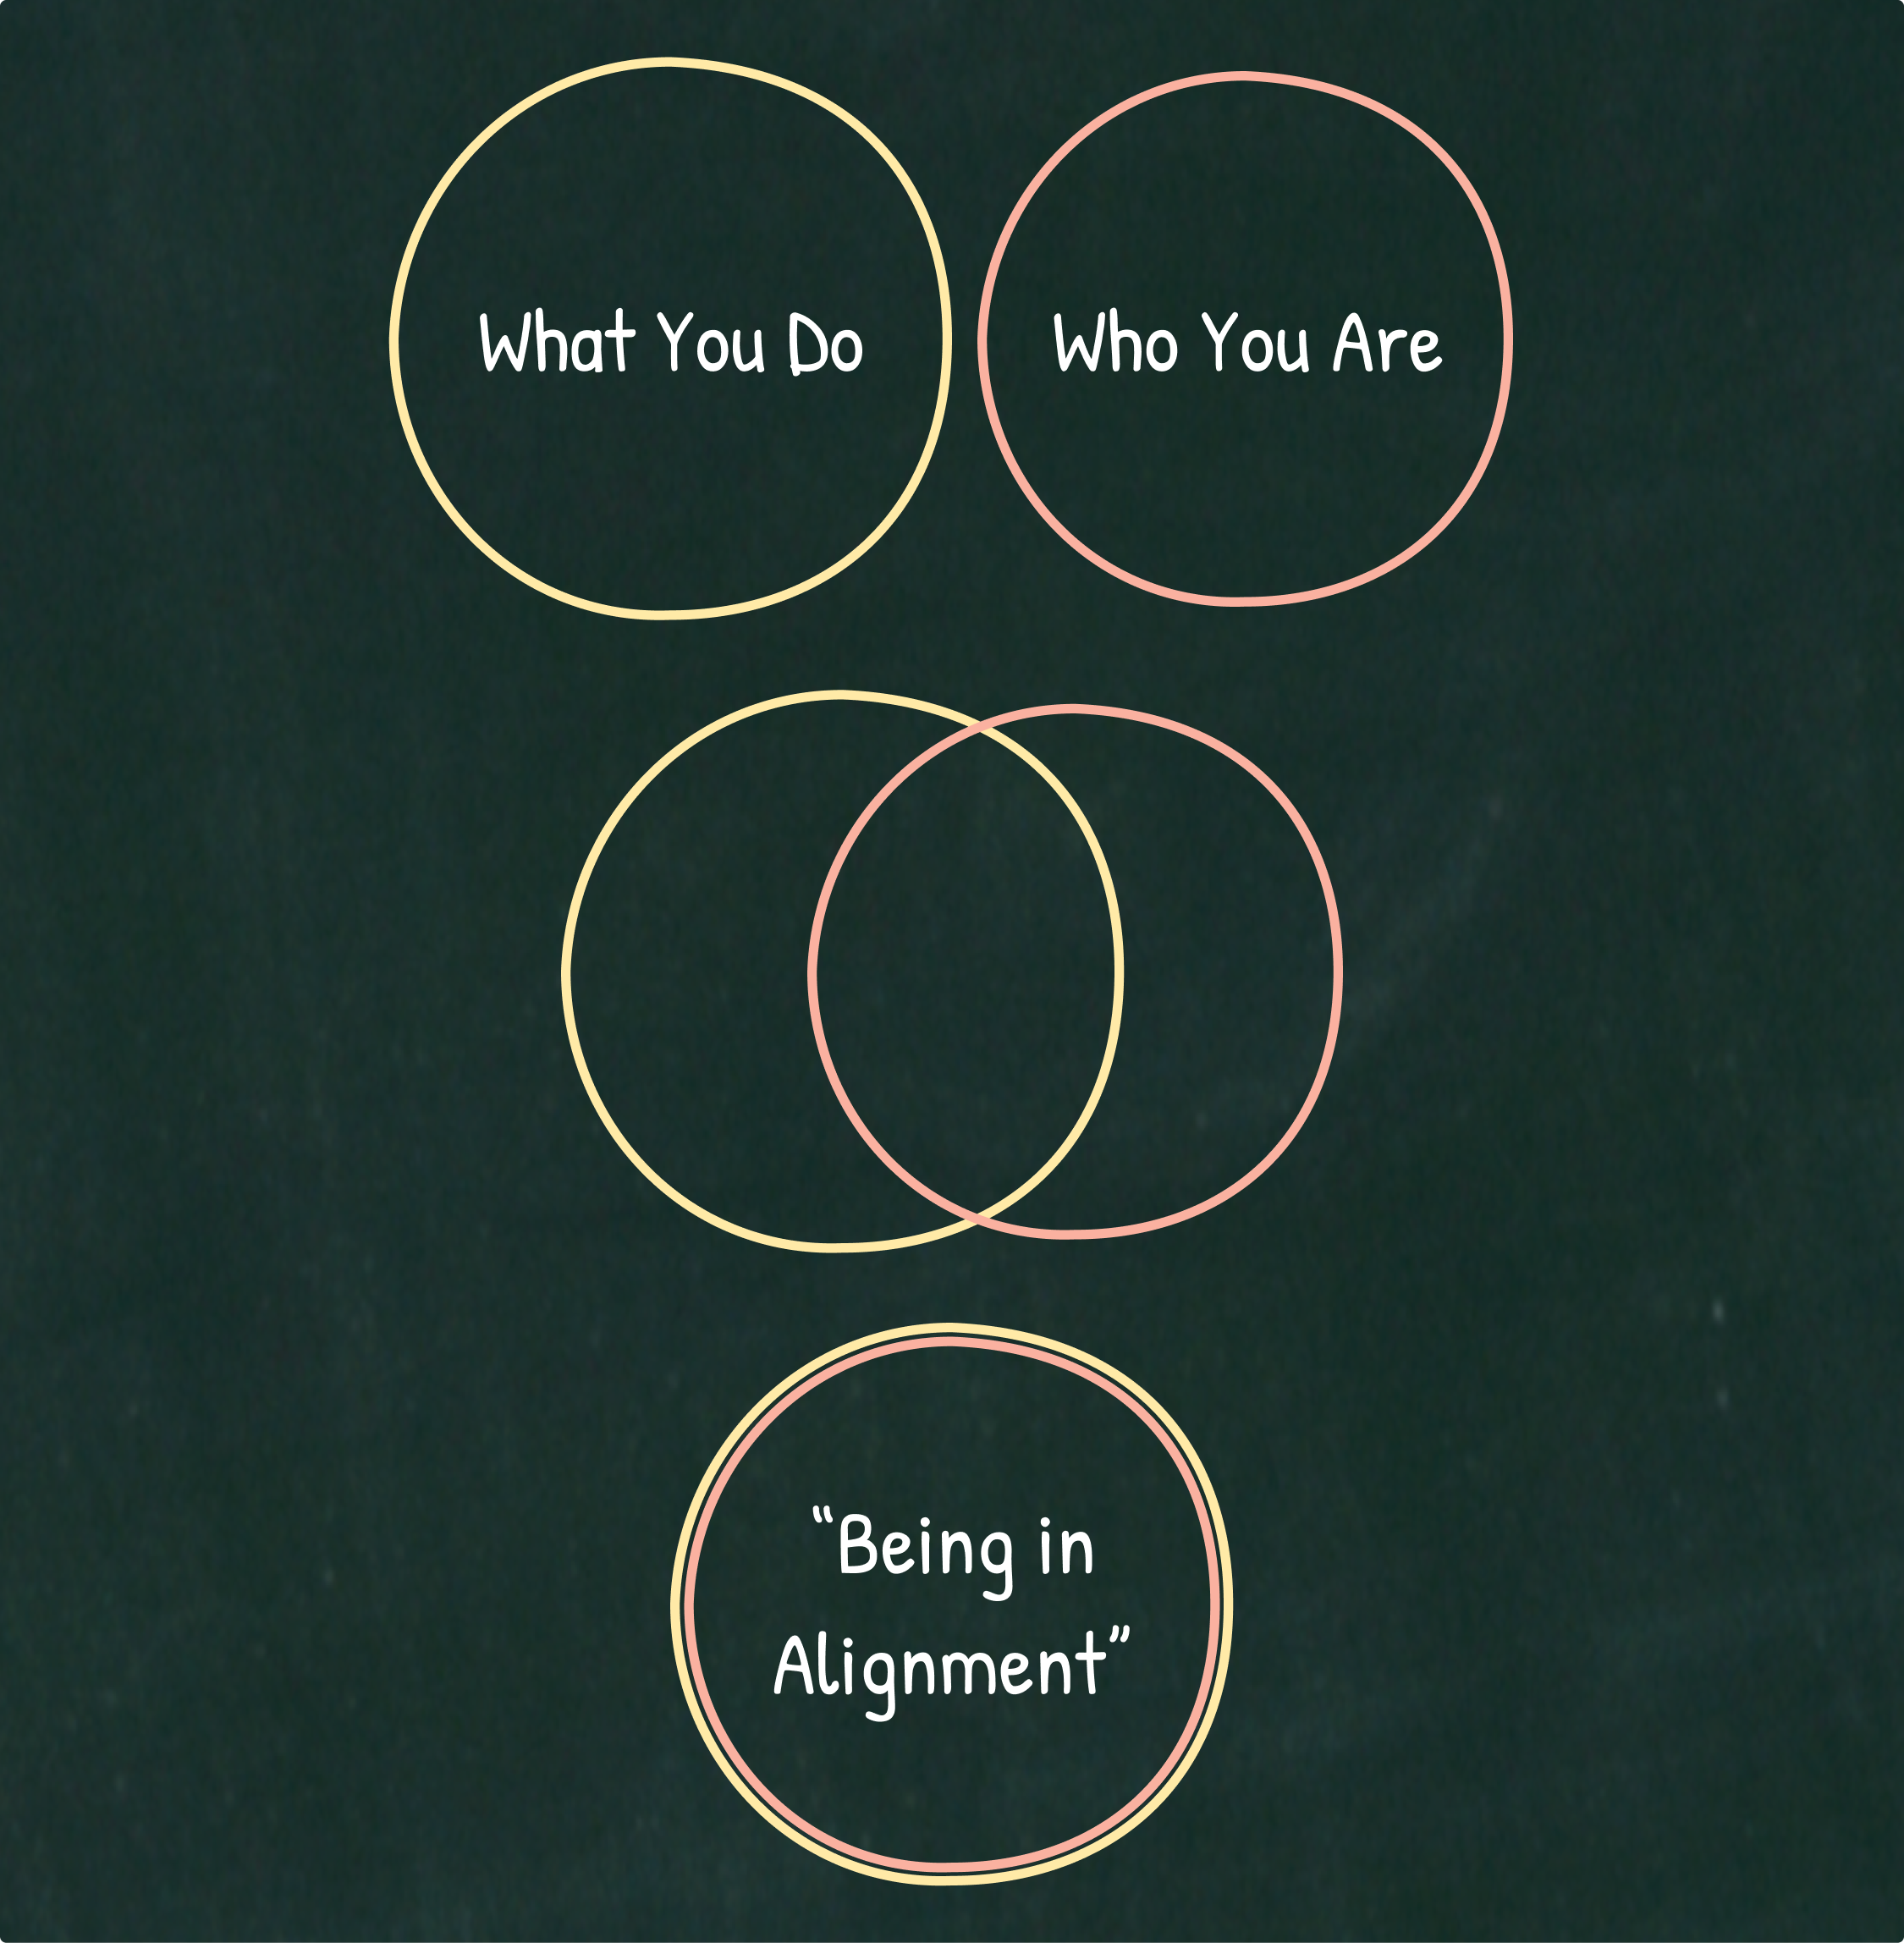 Two circles (one represents "What you do", and the other "Who you are") getting closer until it becomes one circle.